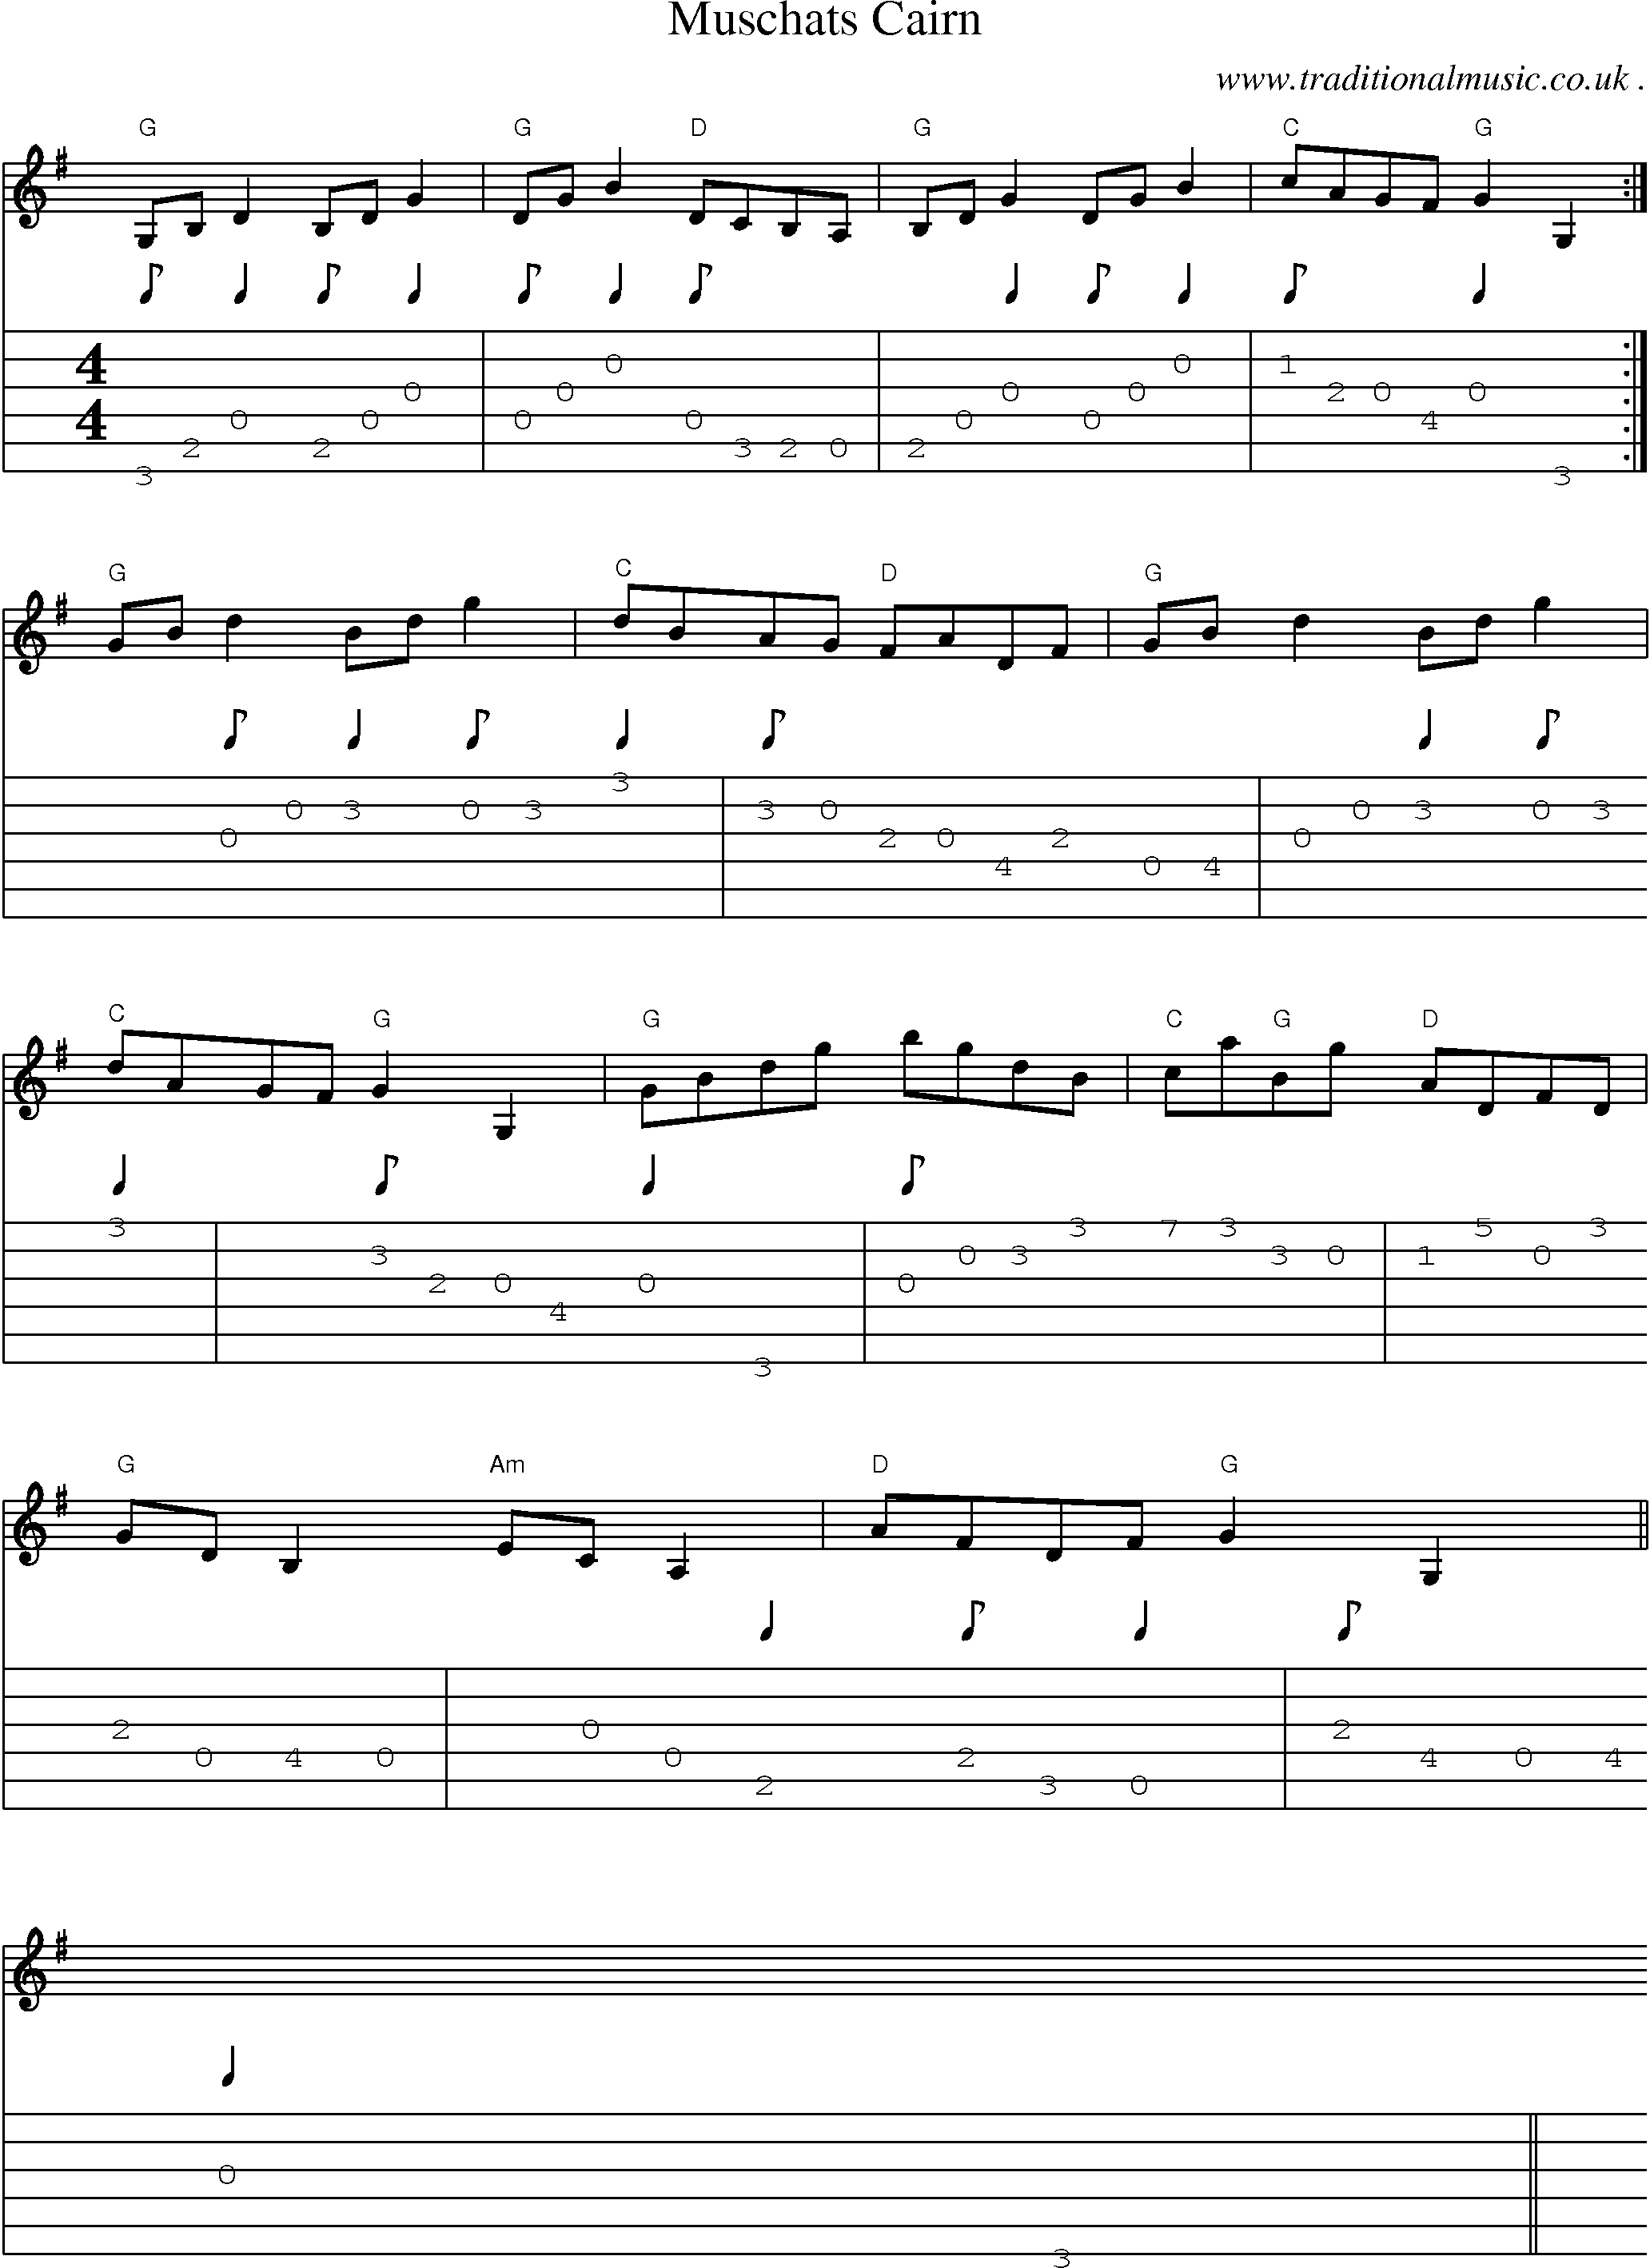 Sheet-music  score, Chords and Guitar Tabs for Muschats Cairn